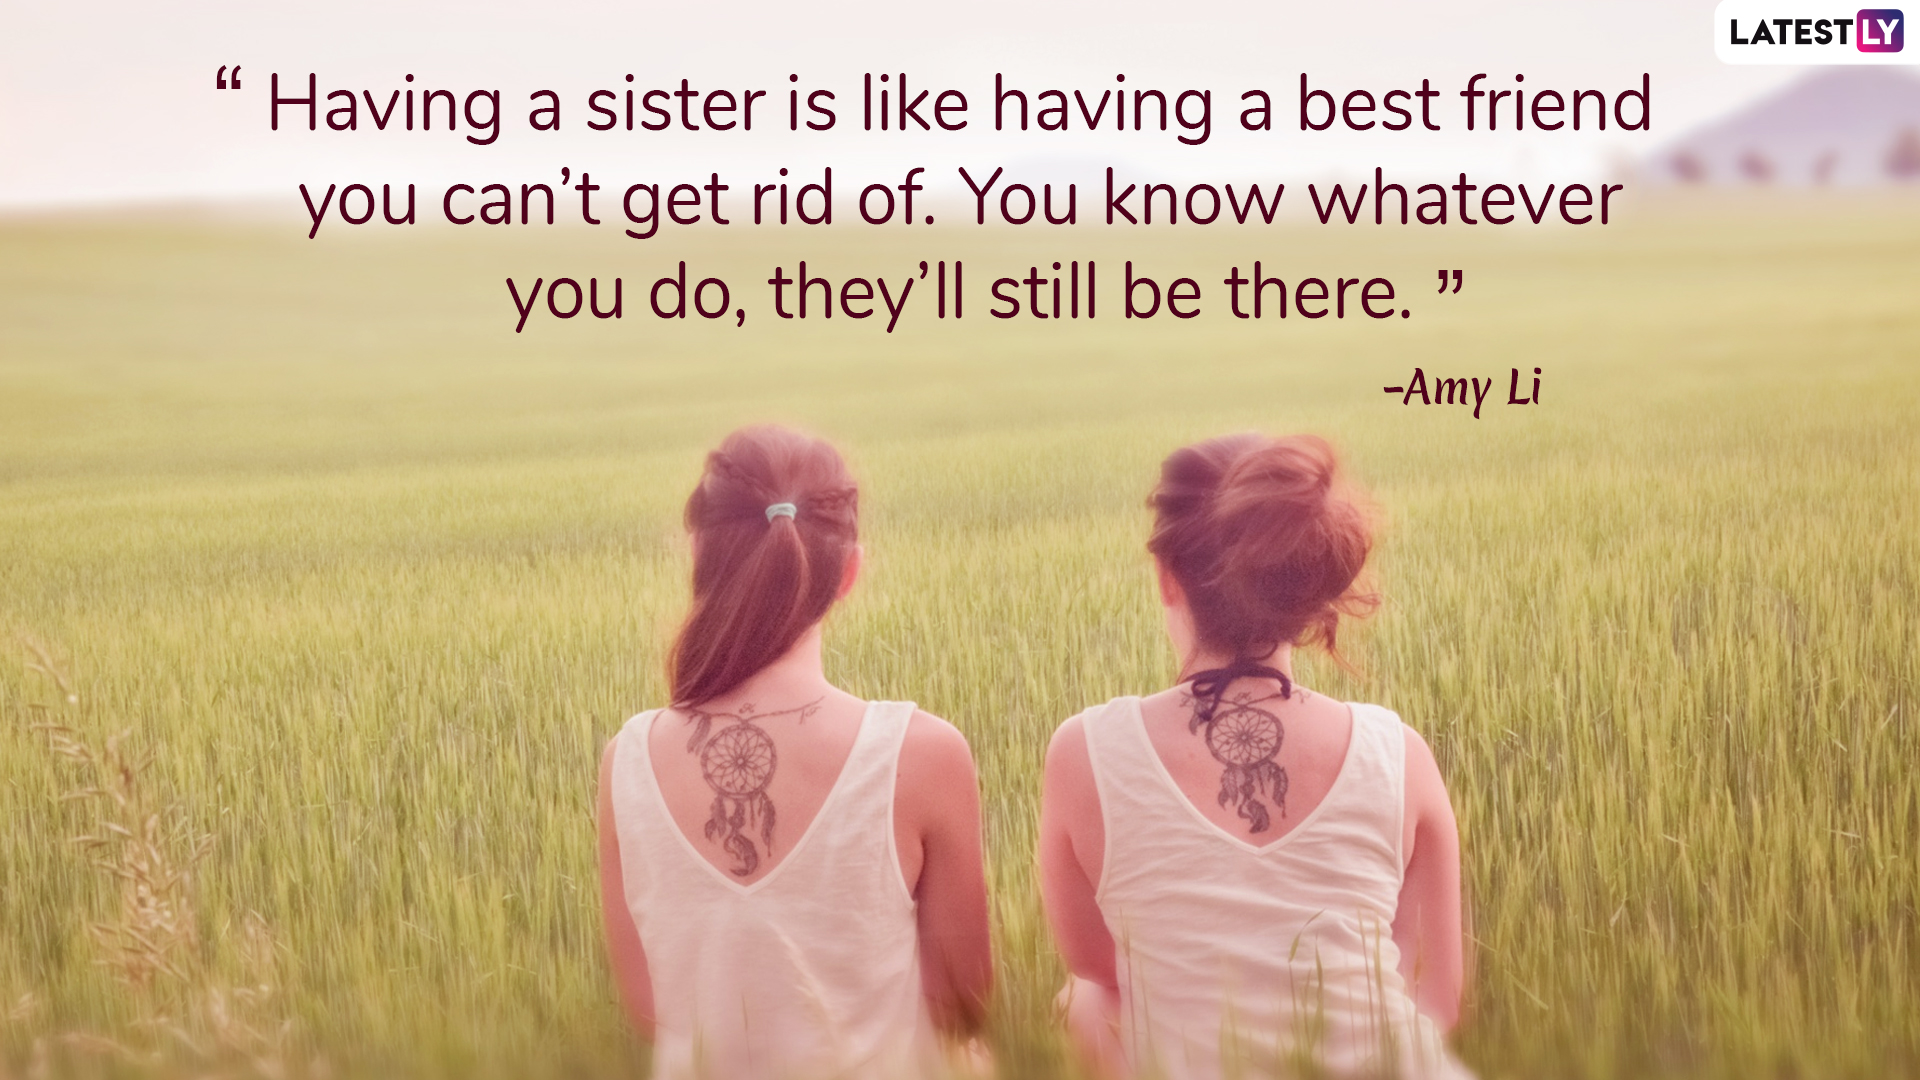 Sisters Day 2021 Best Quotes And Messages To Share With Your Sisters Celebrating Sisterhood 🙏 